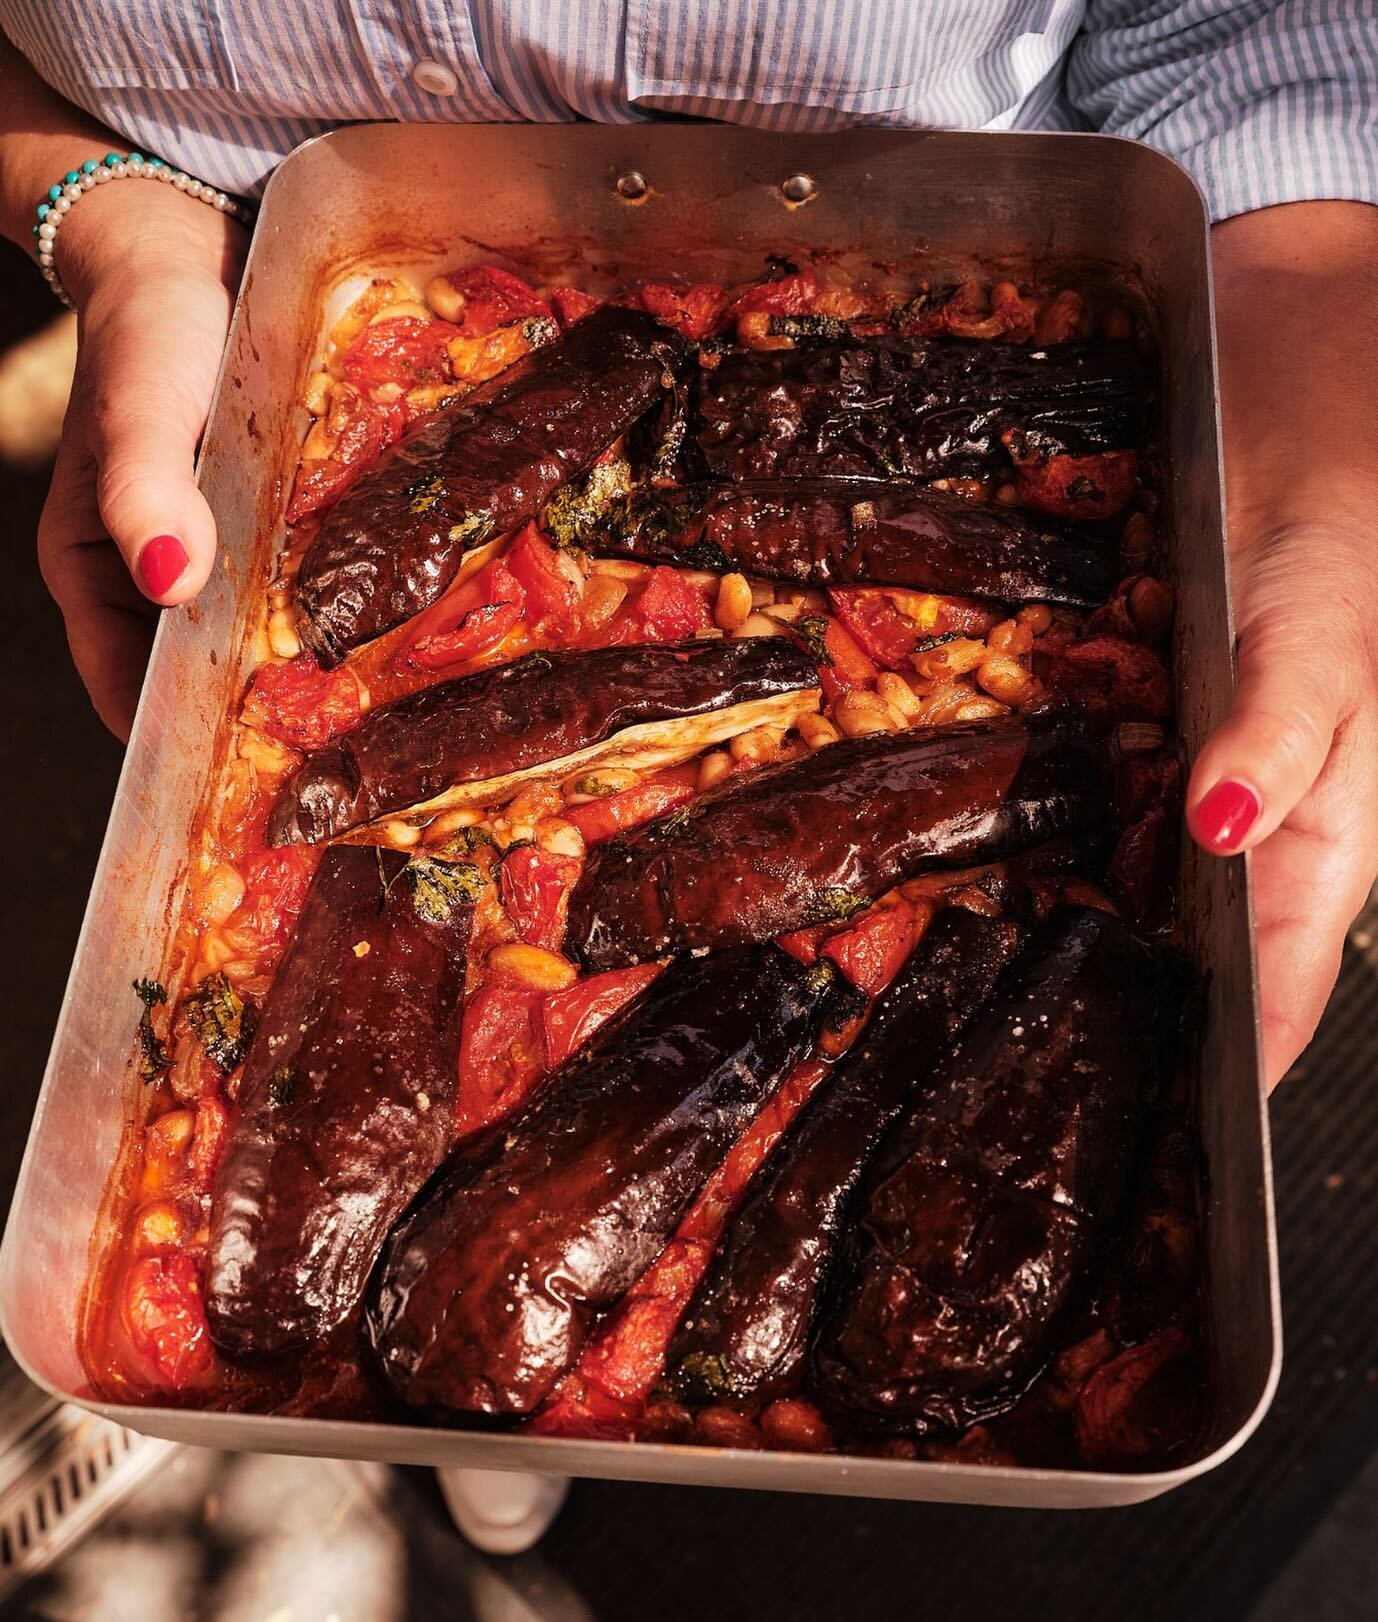 Greek Orthodox Easter is on the 5th of May this year and many will be observing lent, following a plant based diet. My new cookbook, THE MEDITERRANEAN COOK, is filled with seasonal plant forward recipes, like this delicious Roasted eggplant  and cann